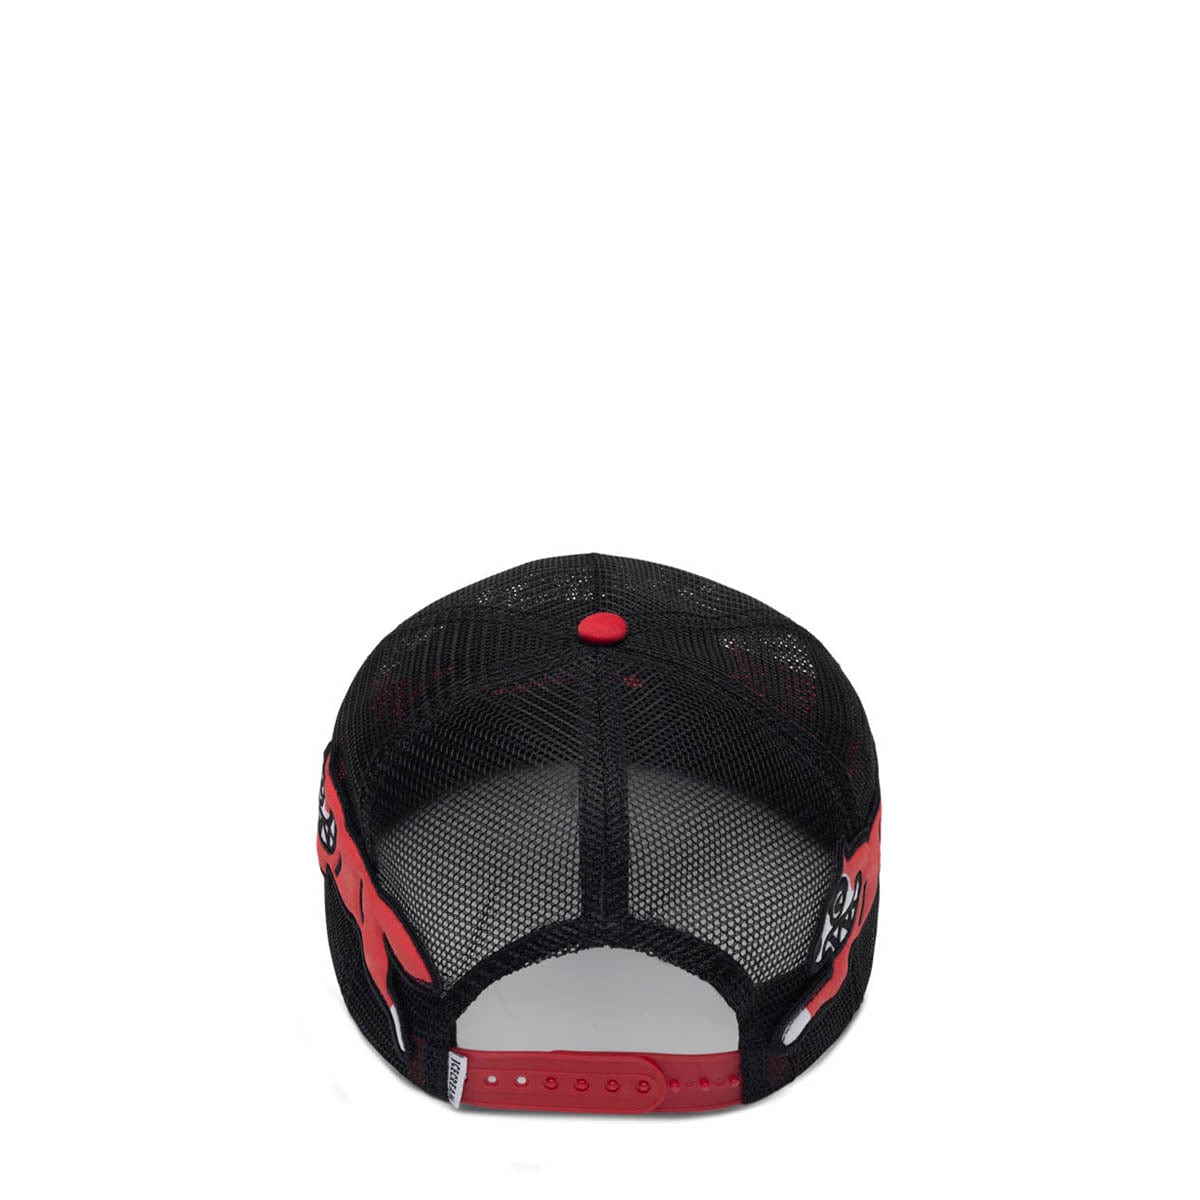 ICECREAM Accessories - HATS - Snapback-Fitted Hat ROCOCCO RED / O/S MESH TRUCKER HAT